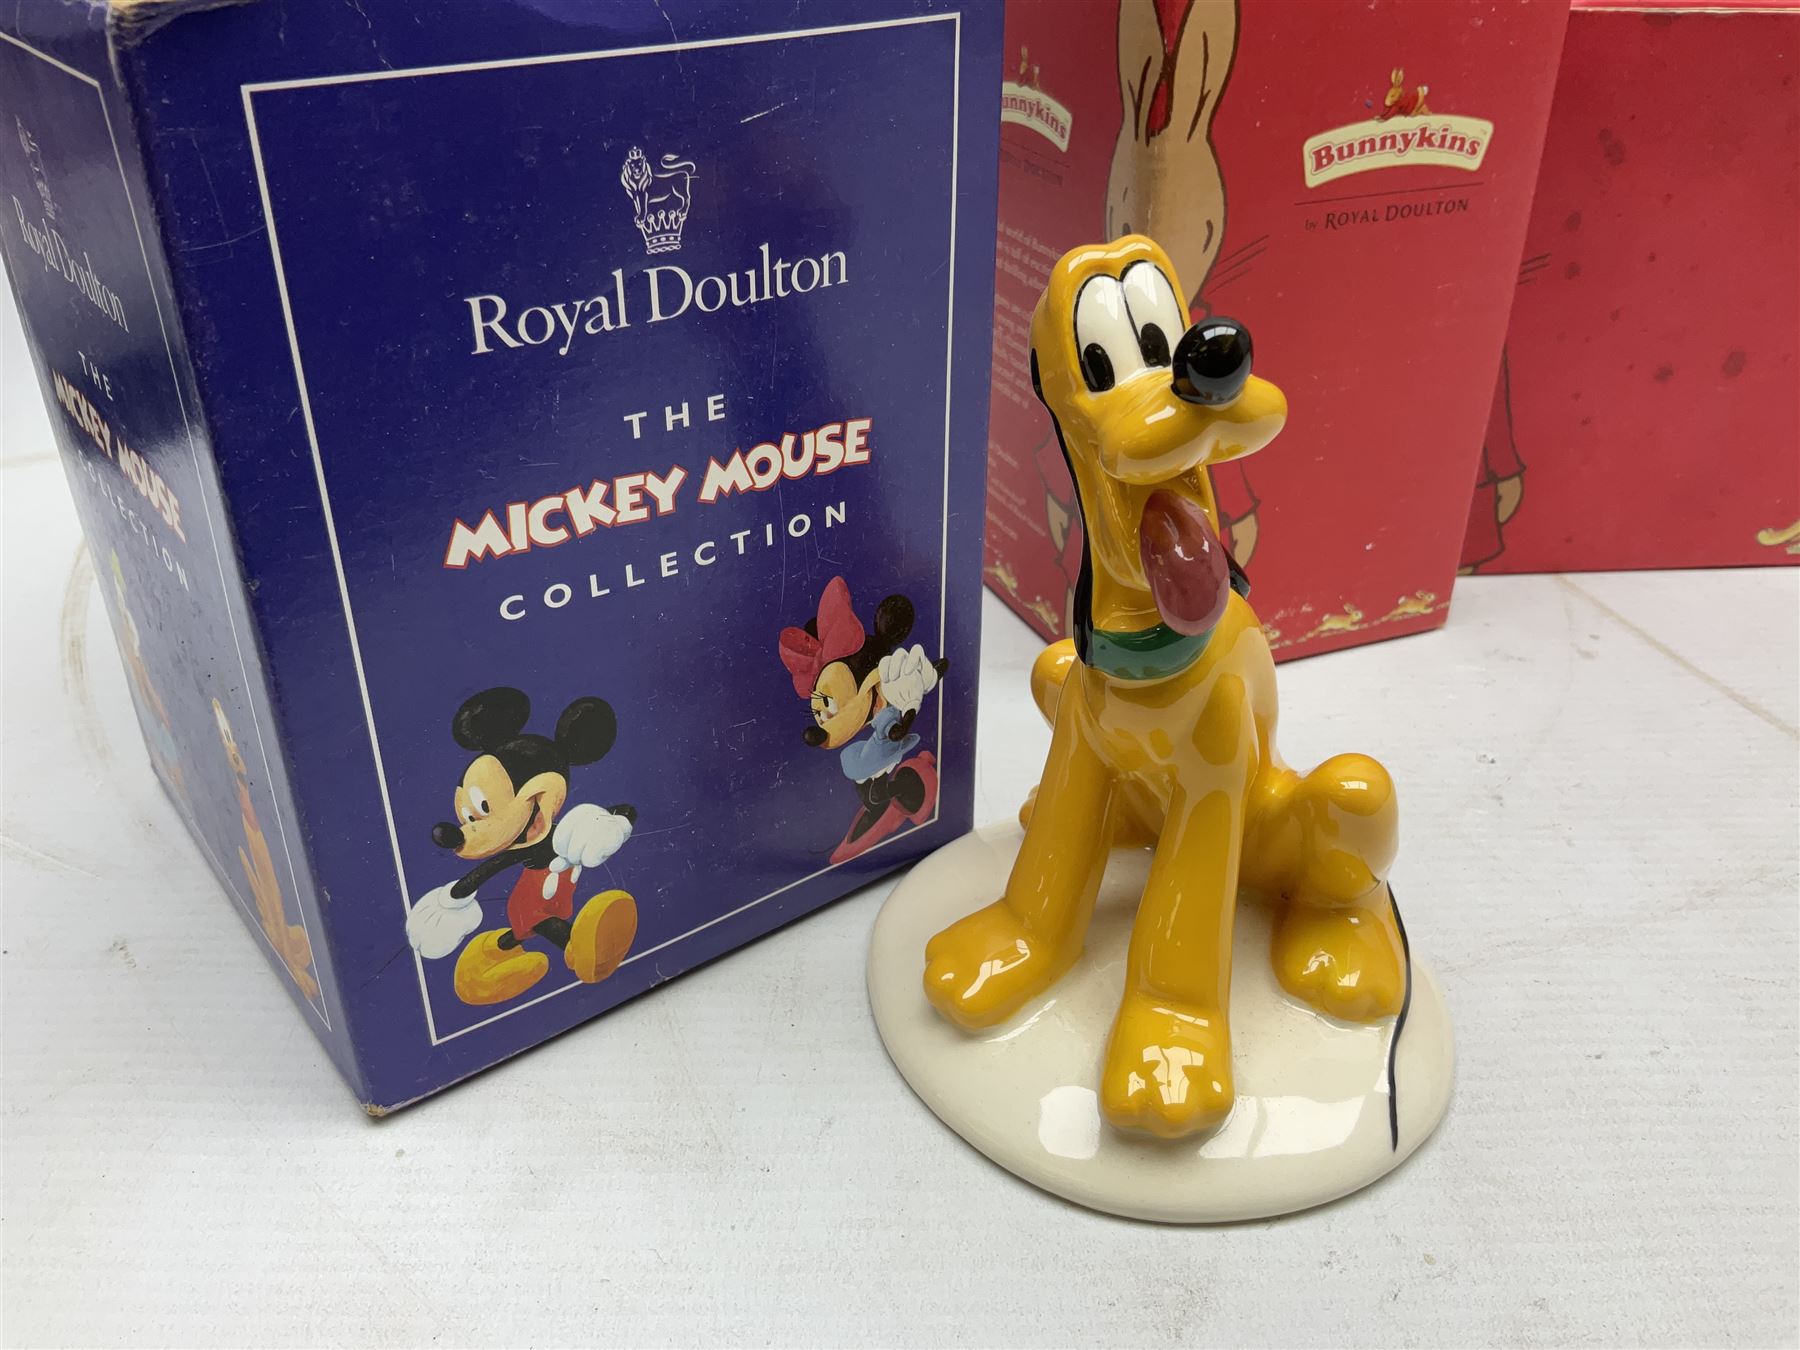 Royal Doulton The Mickey Mouse Collection Pluto figure - Image 8 of 16